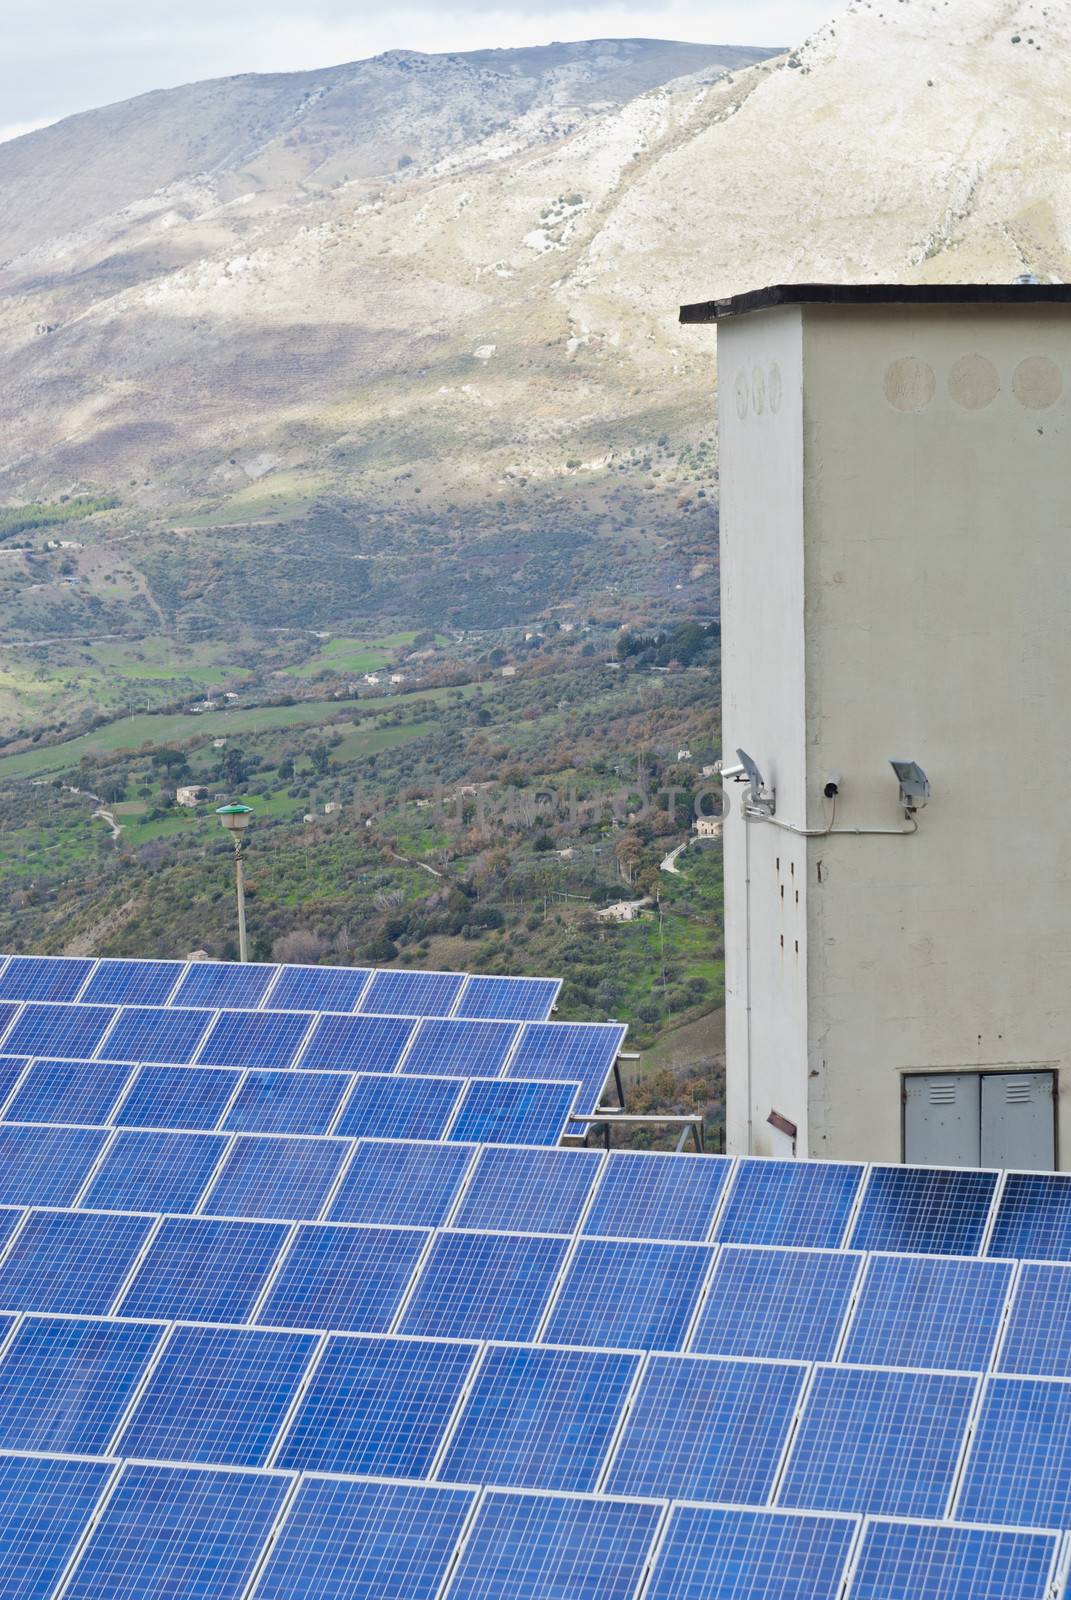 View of solar panels in the Madonie mountains. Sicily